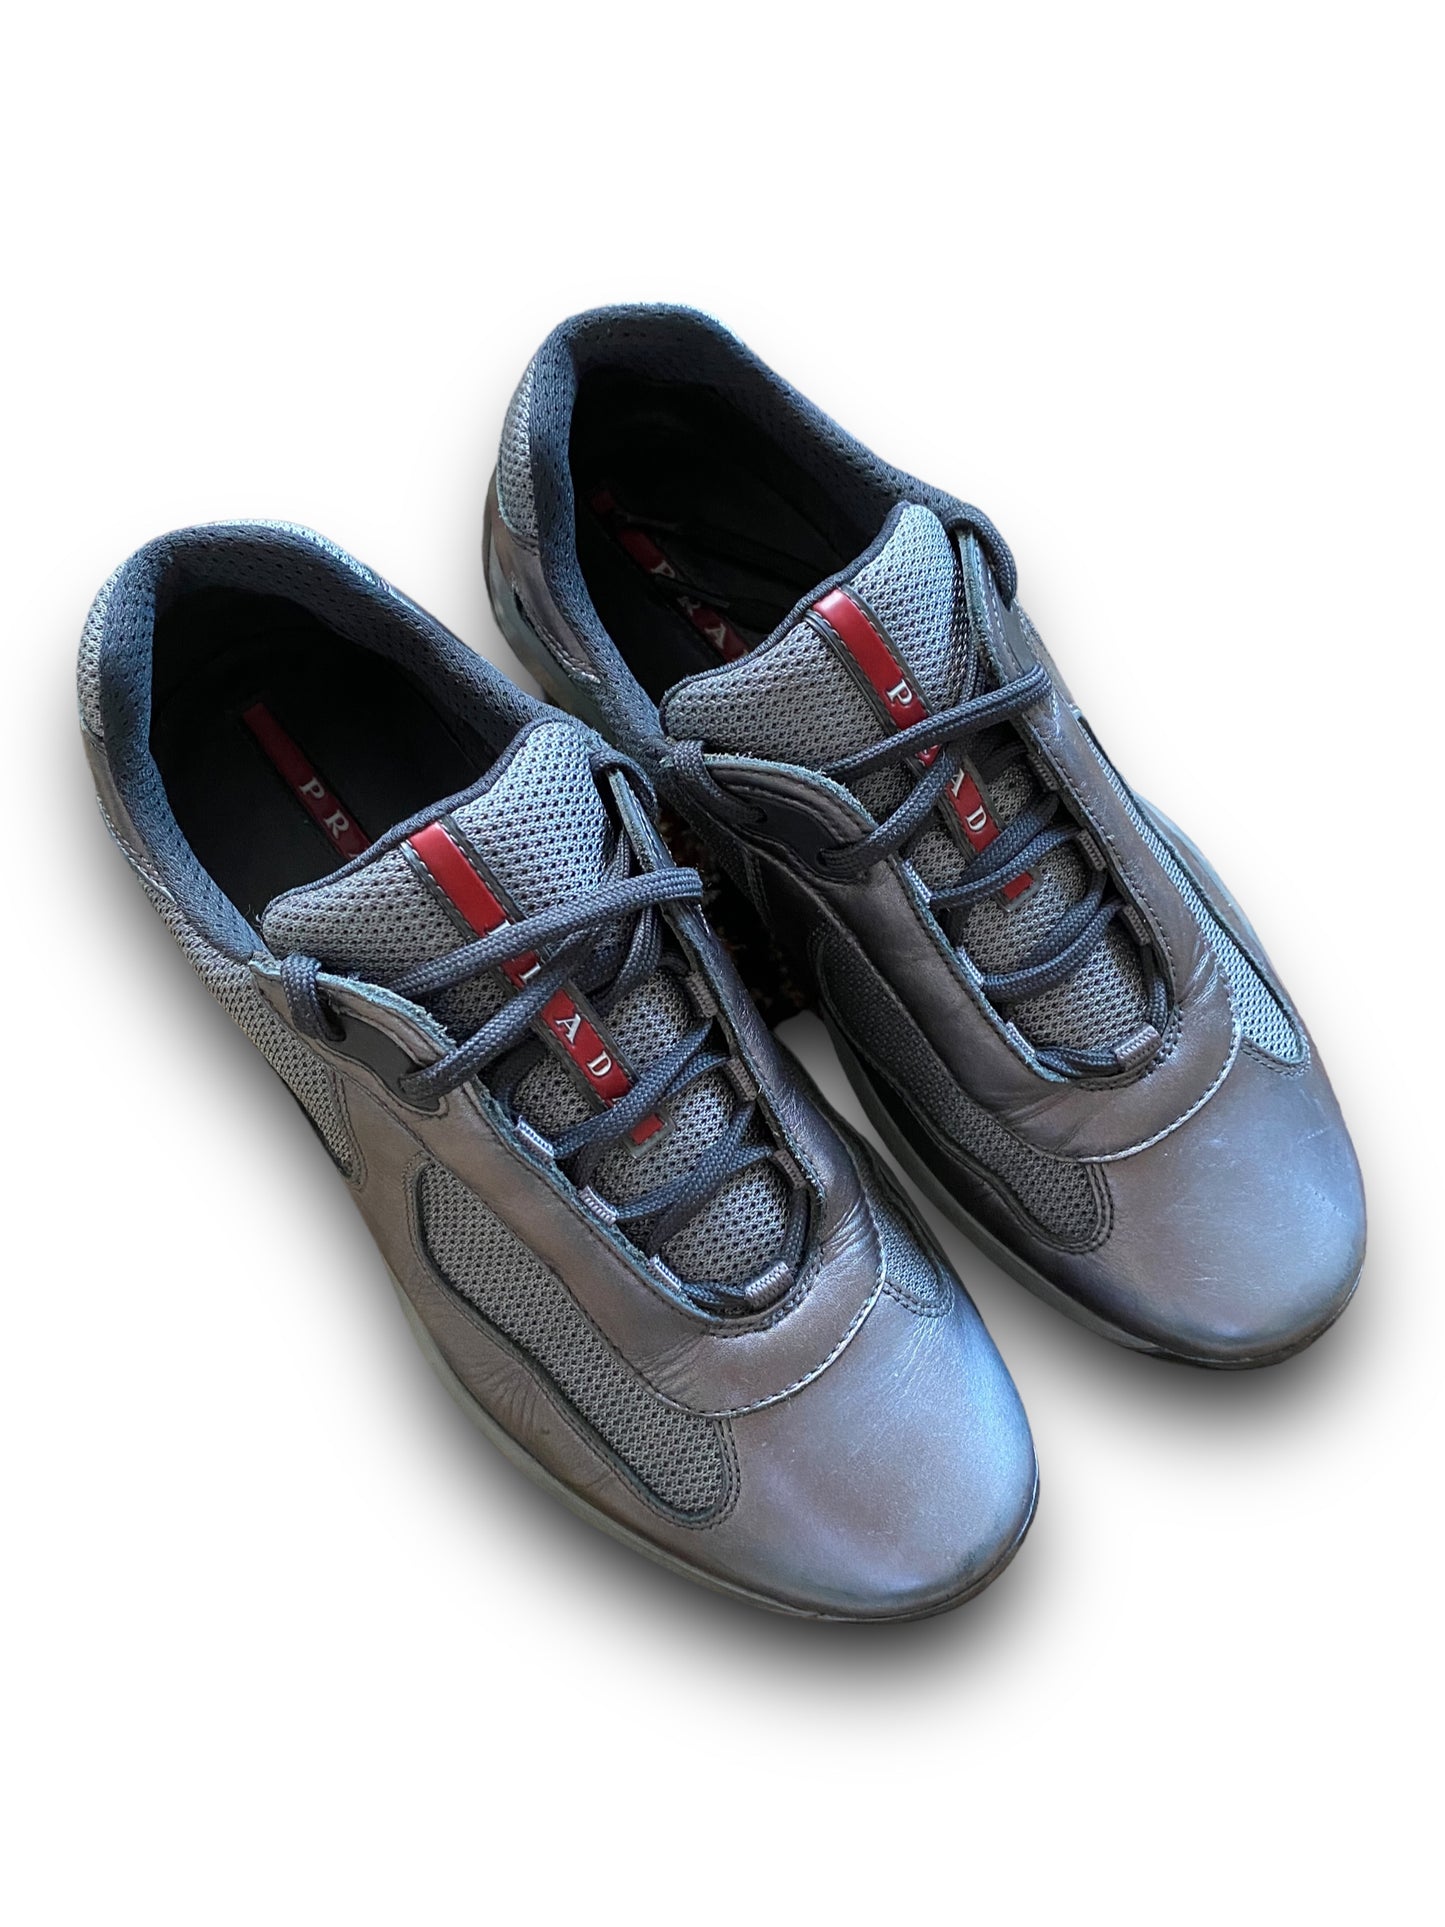 PRADA GREY SILVER LEATHER AMERICA’S CUP SHOES